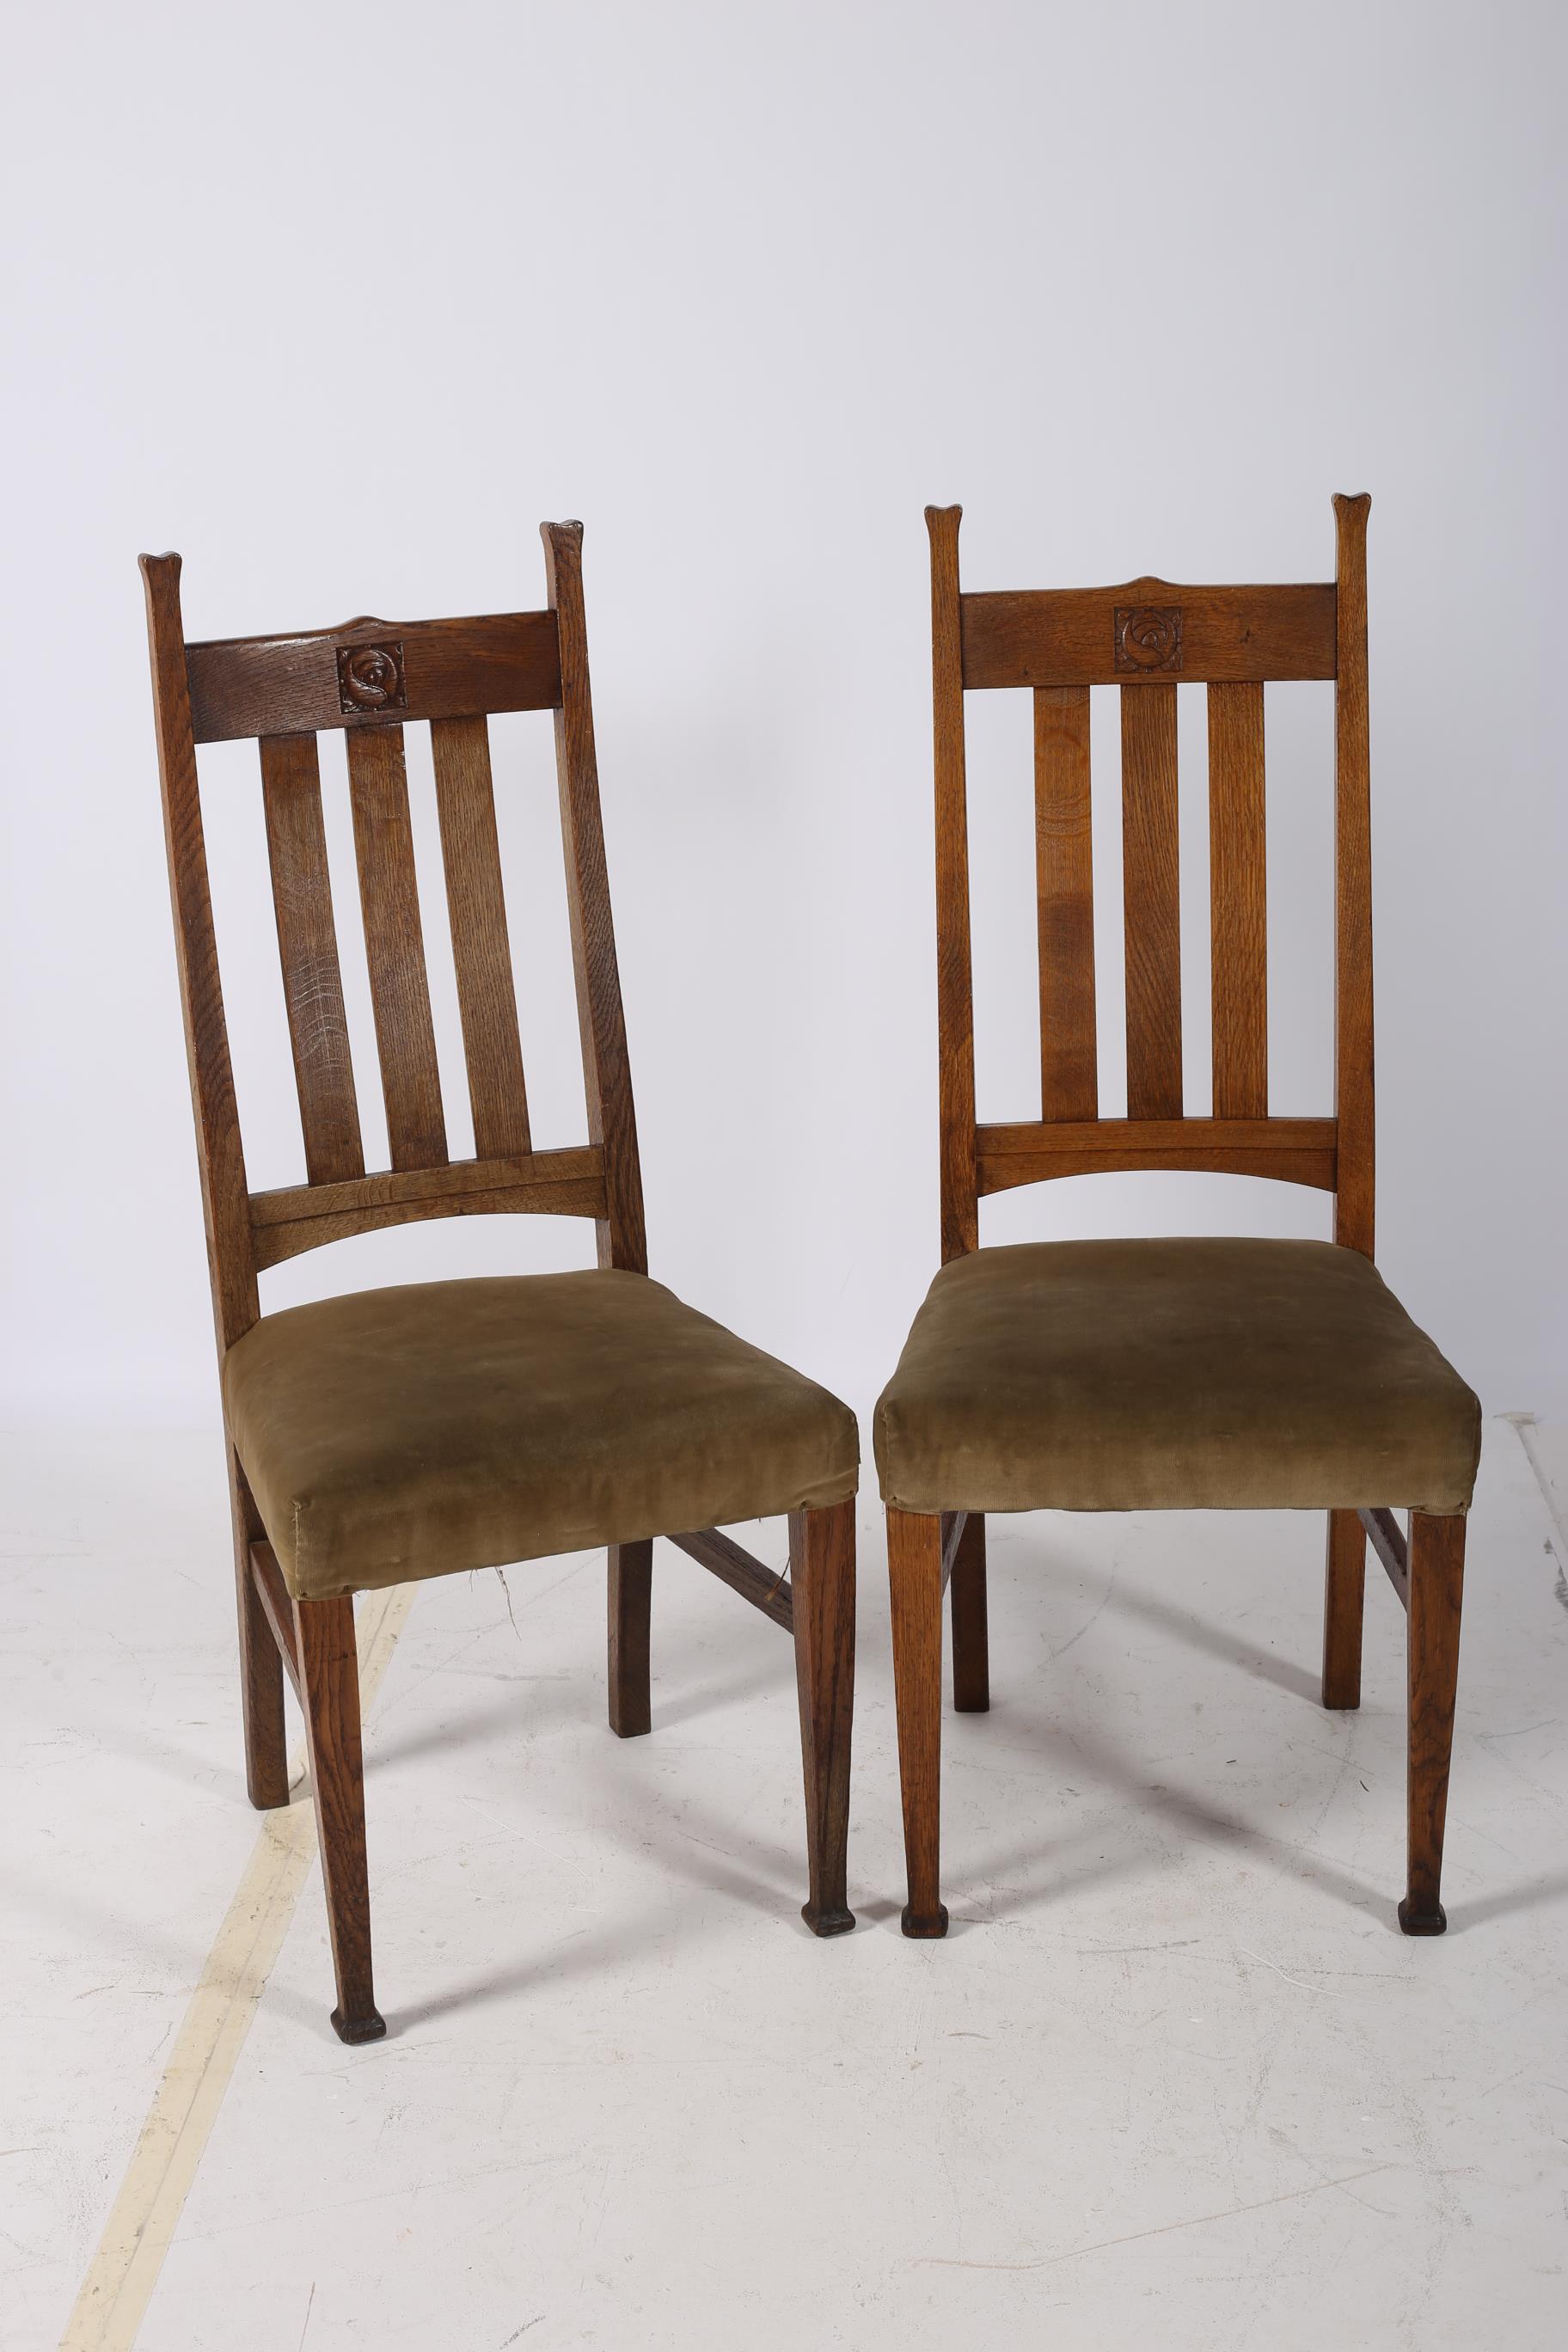 A PAIR OF ARTS AND CRAFTS OAK SIDE CHAIRS each with a shaped top rail and carved panel with